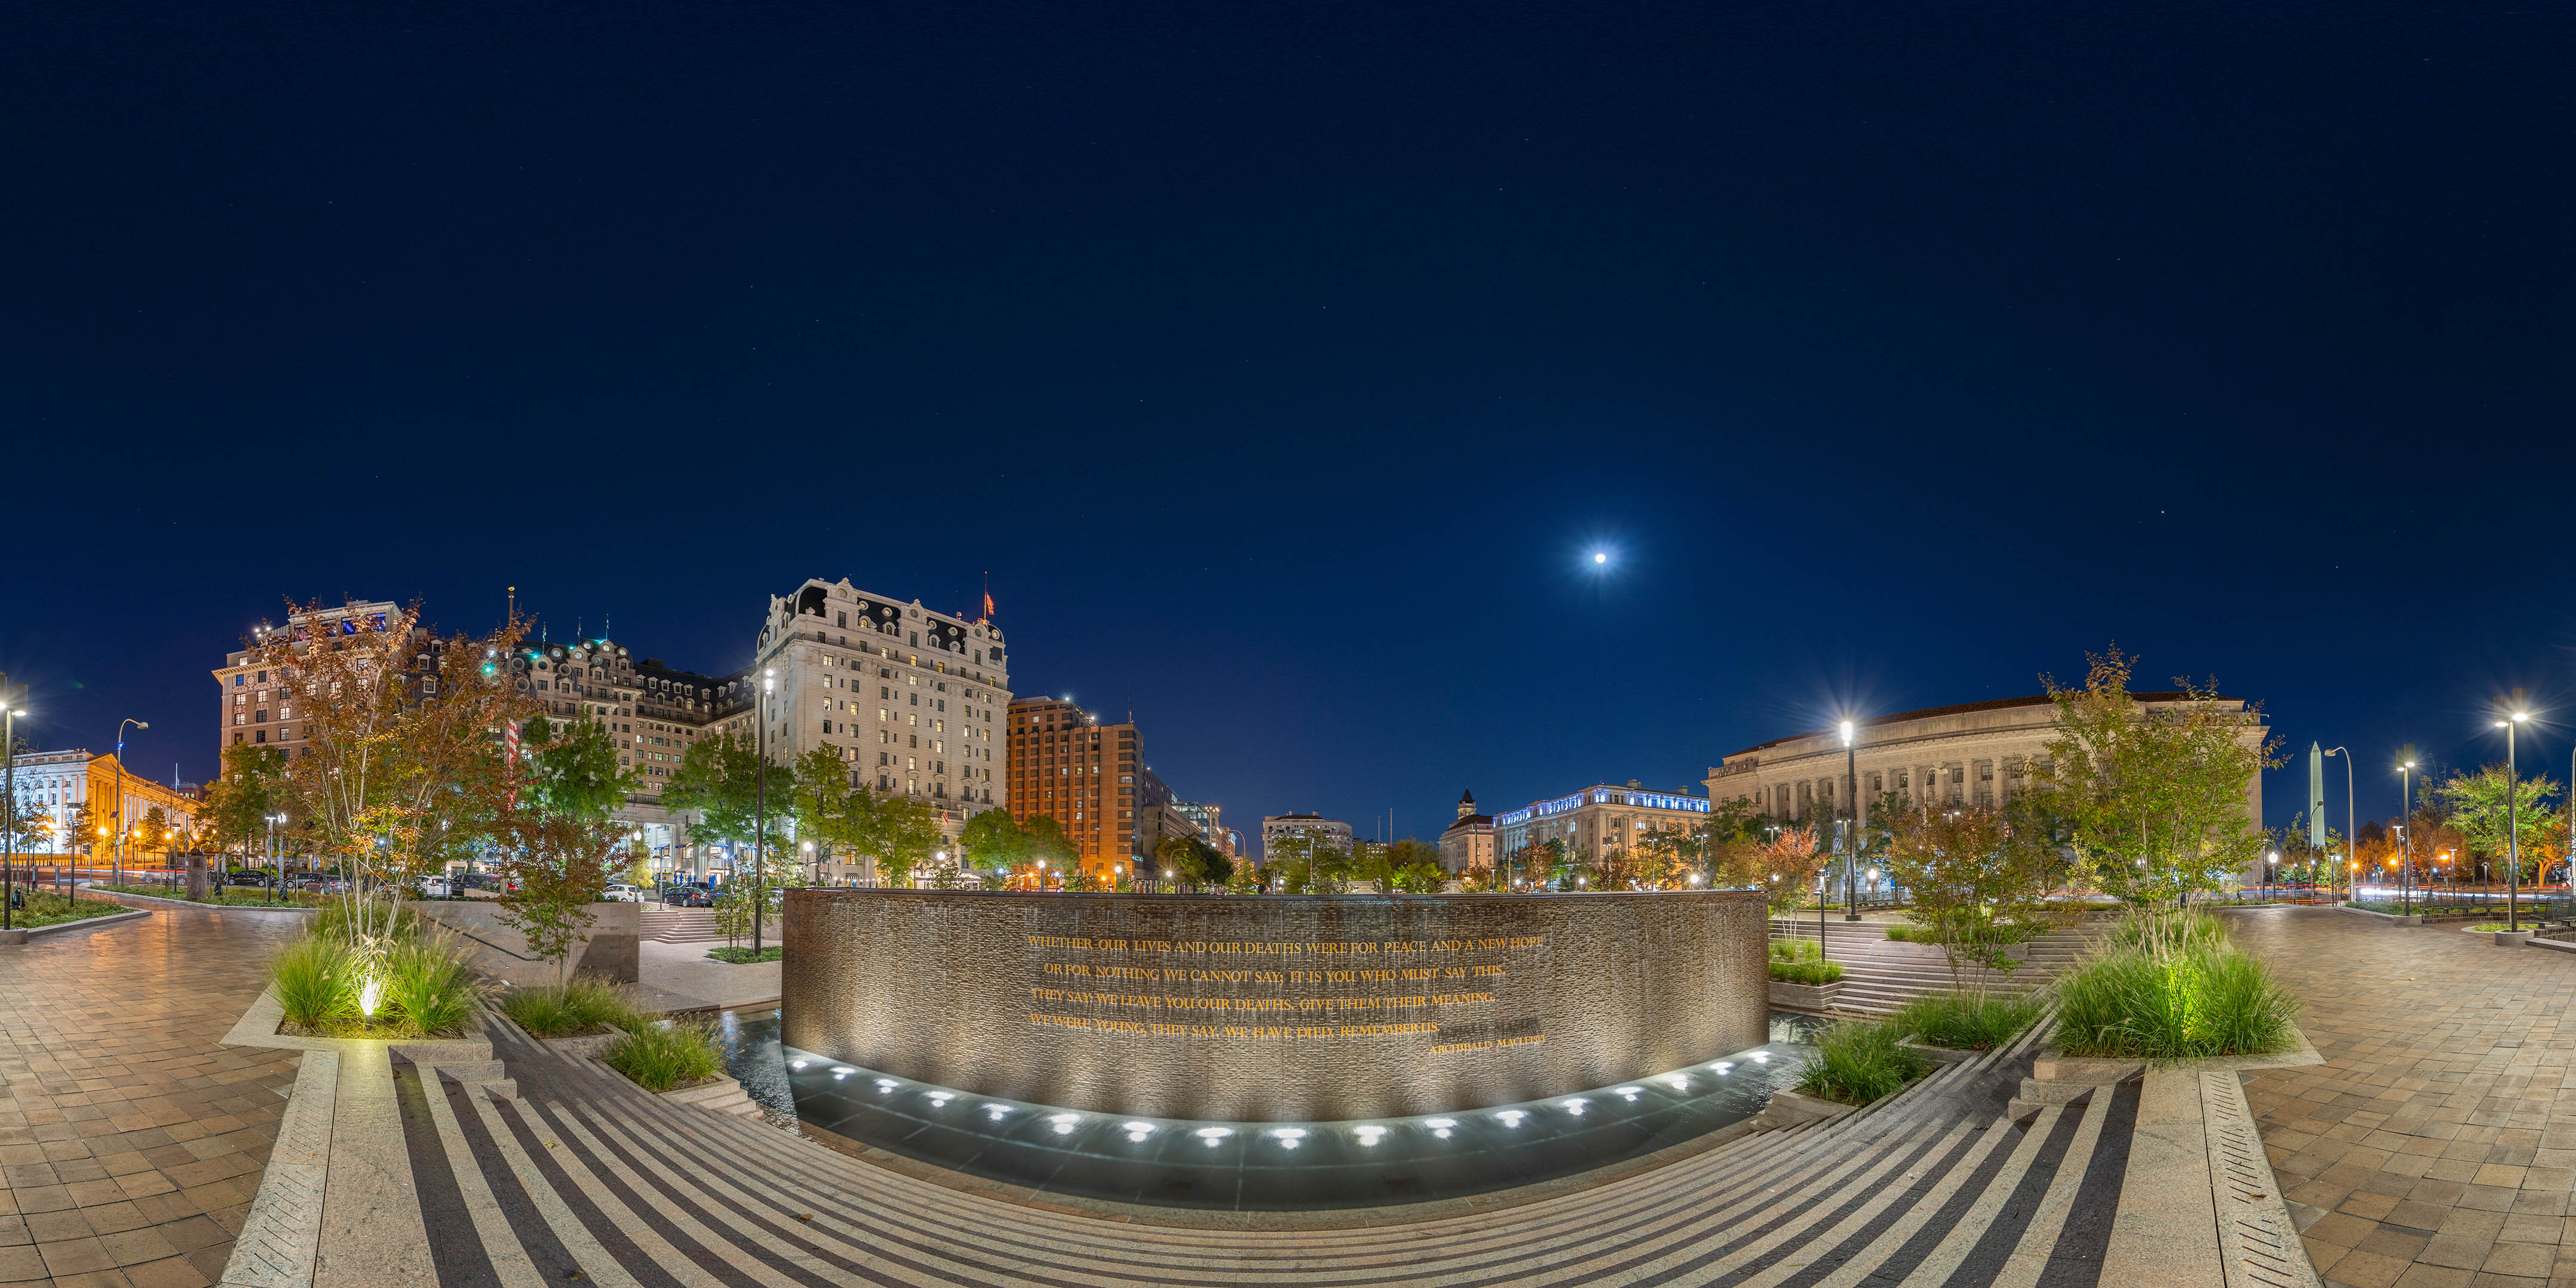 Panoramic view of the World War I Memorial from virtual tour